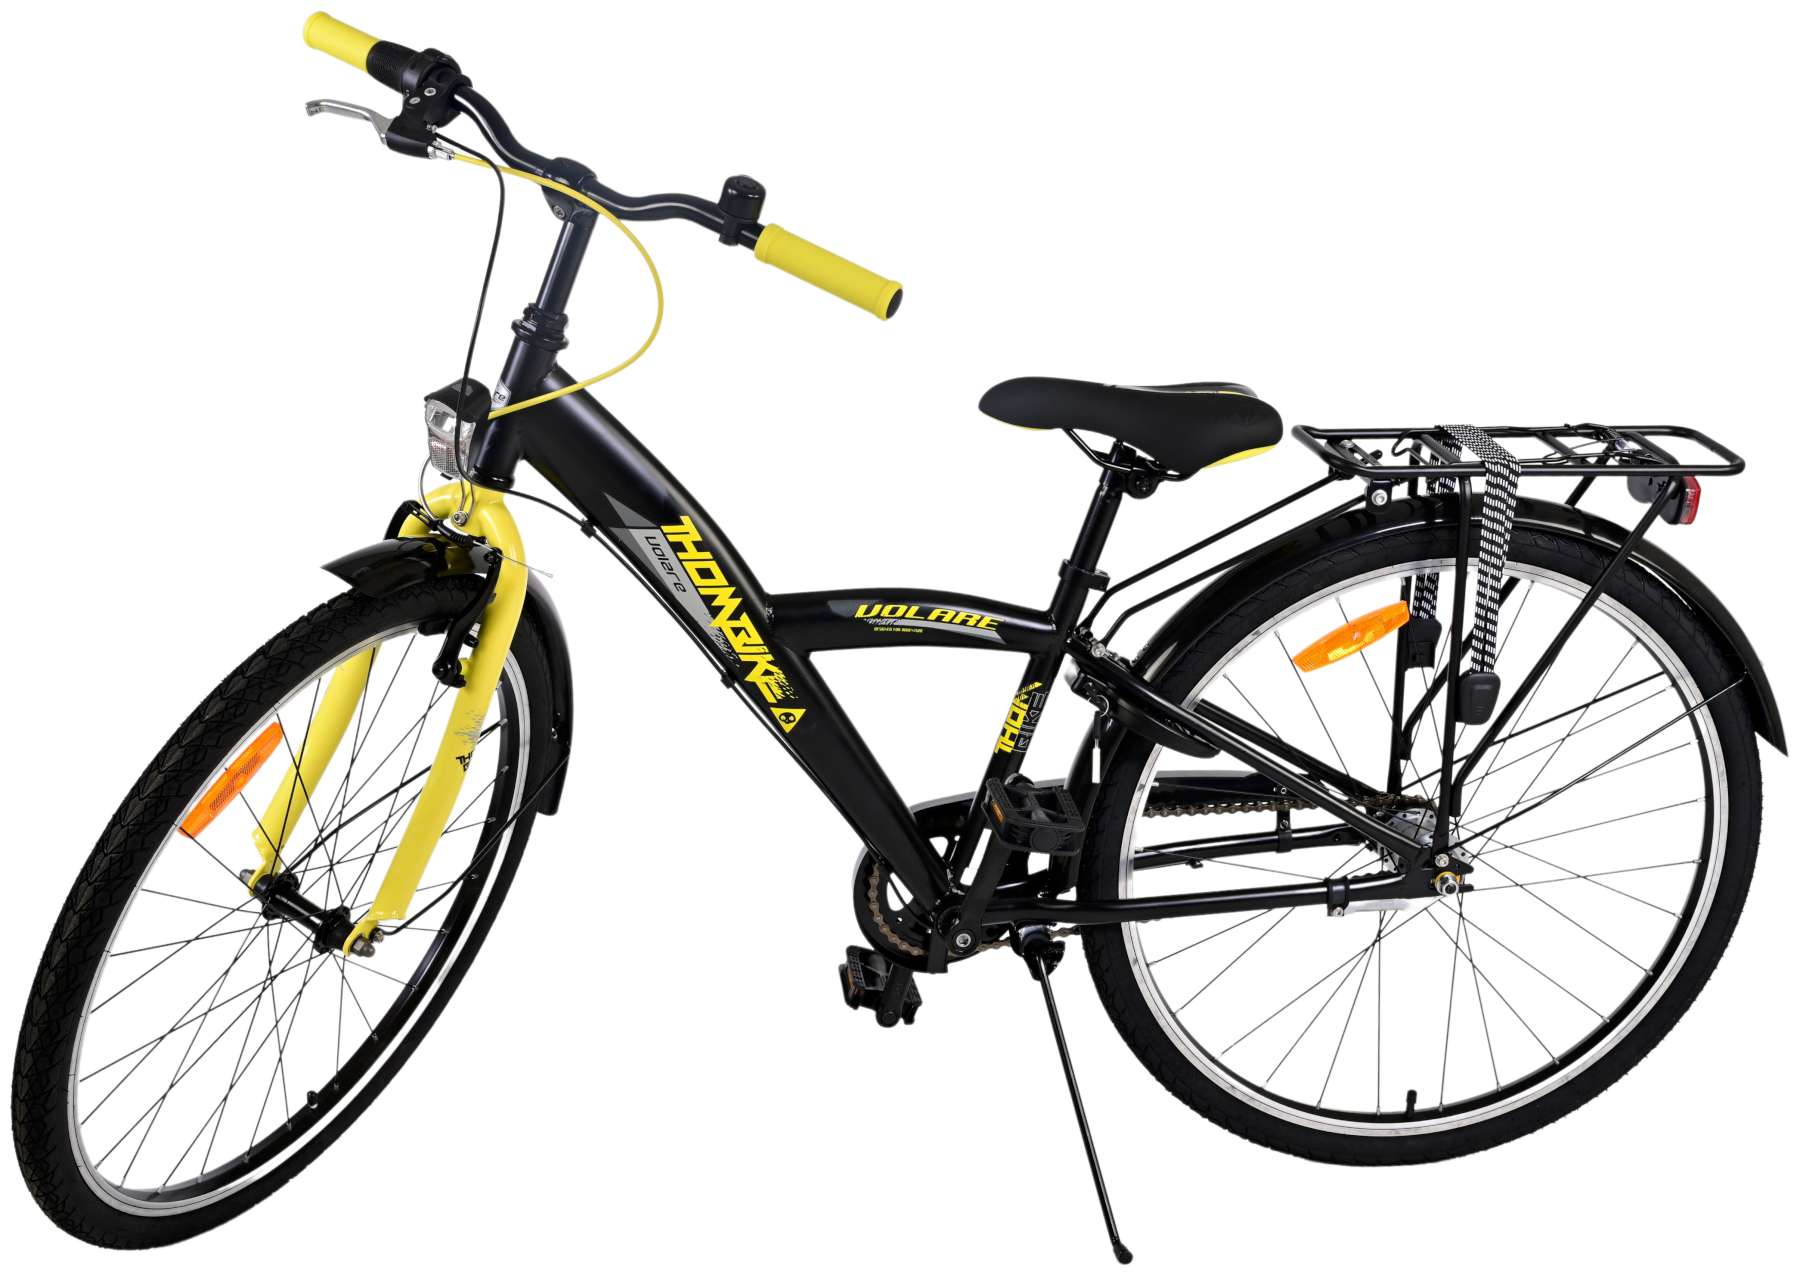 Thombike_26_inch_-_9-W1800_vbt5-d0